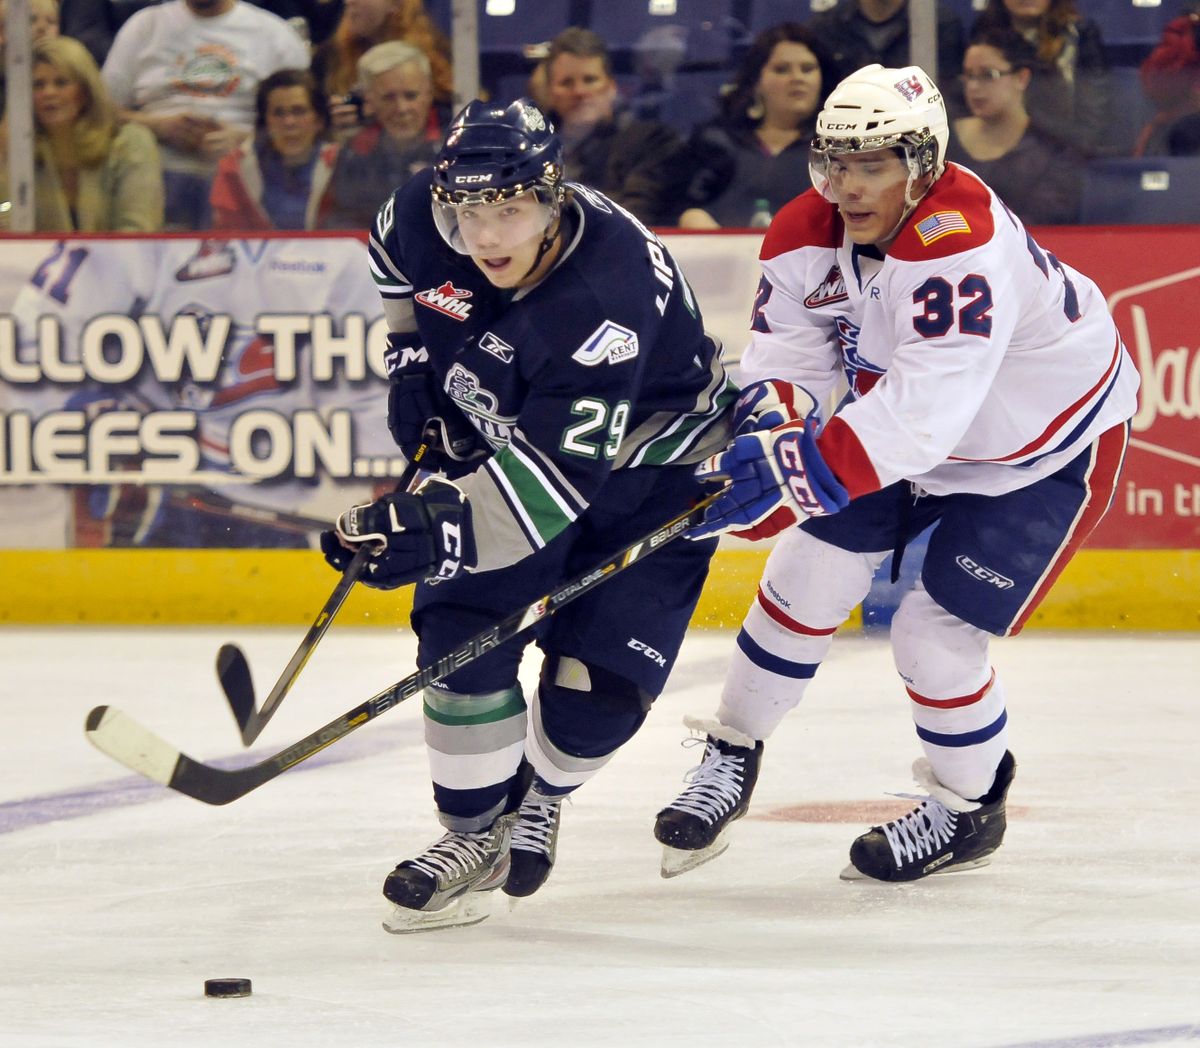 The Chiefs’ Todd Fiddler, right, tries to slow down the Thunderbirds’ Roberts Lipsbergs on Wednesday at the Arena. (Jesse Tinsley)